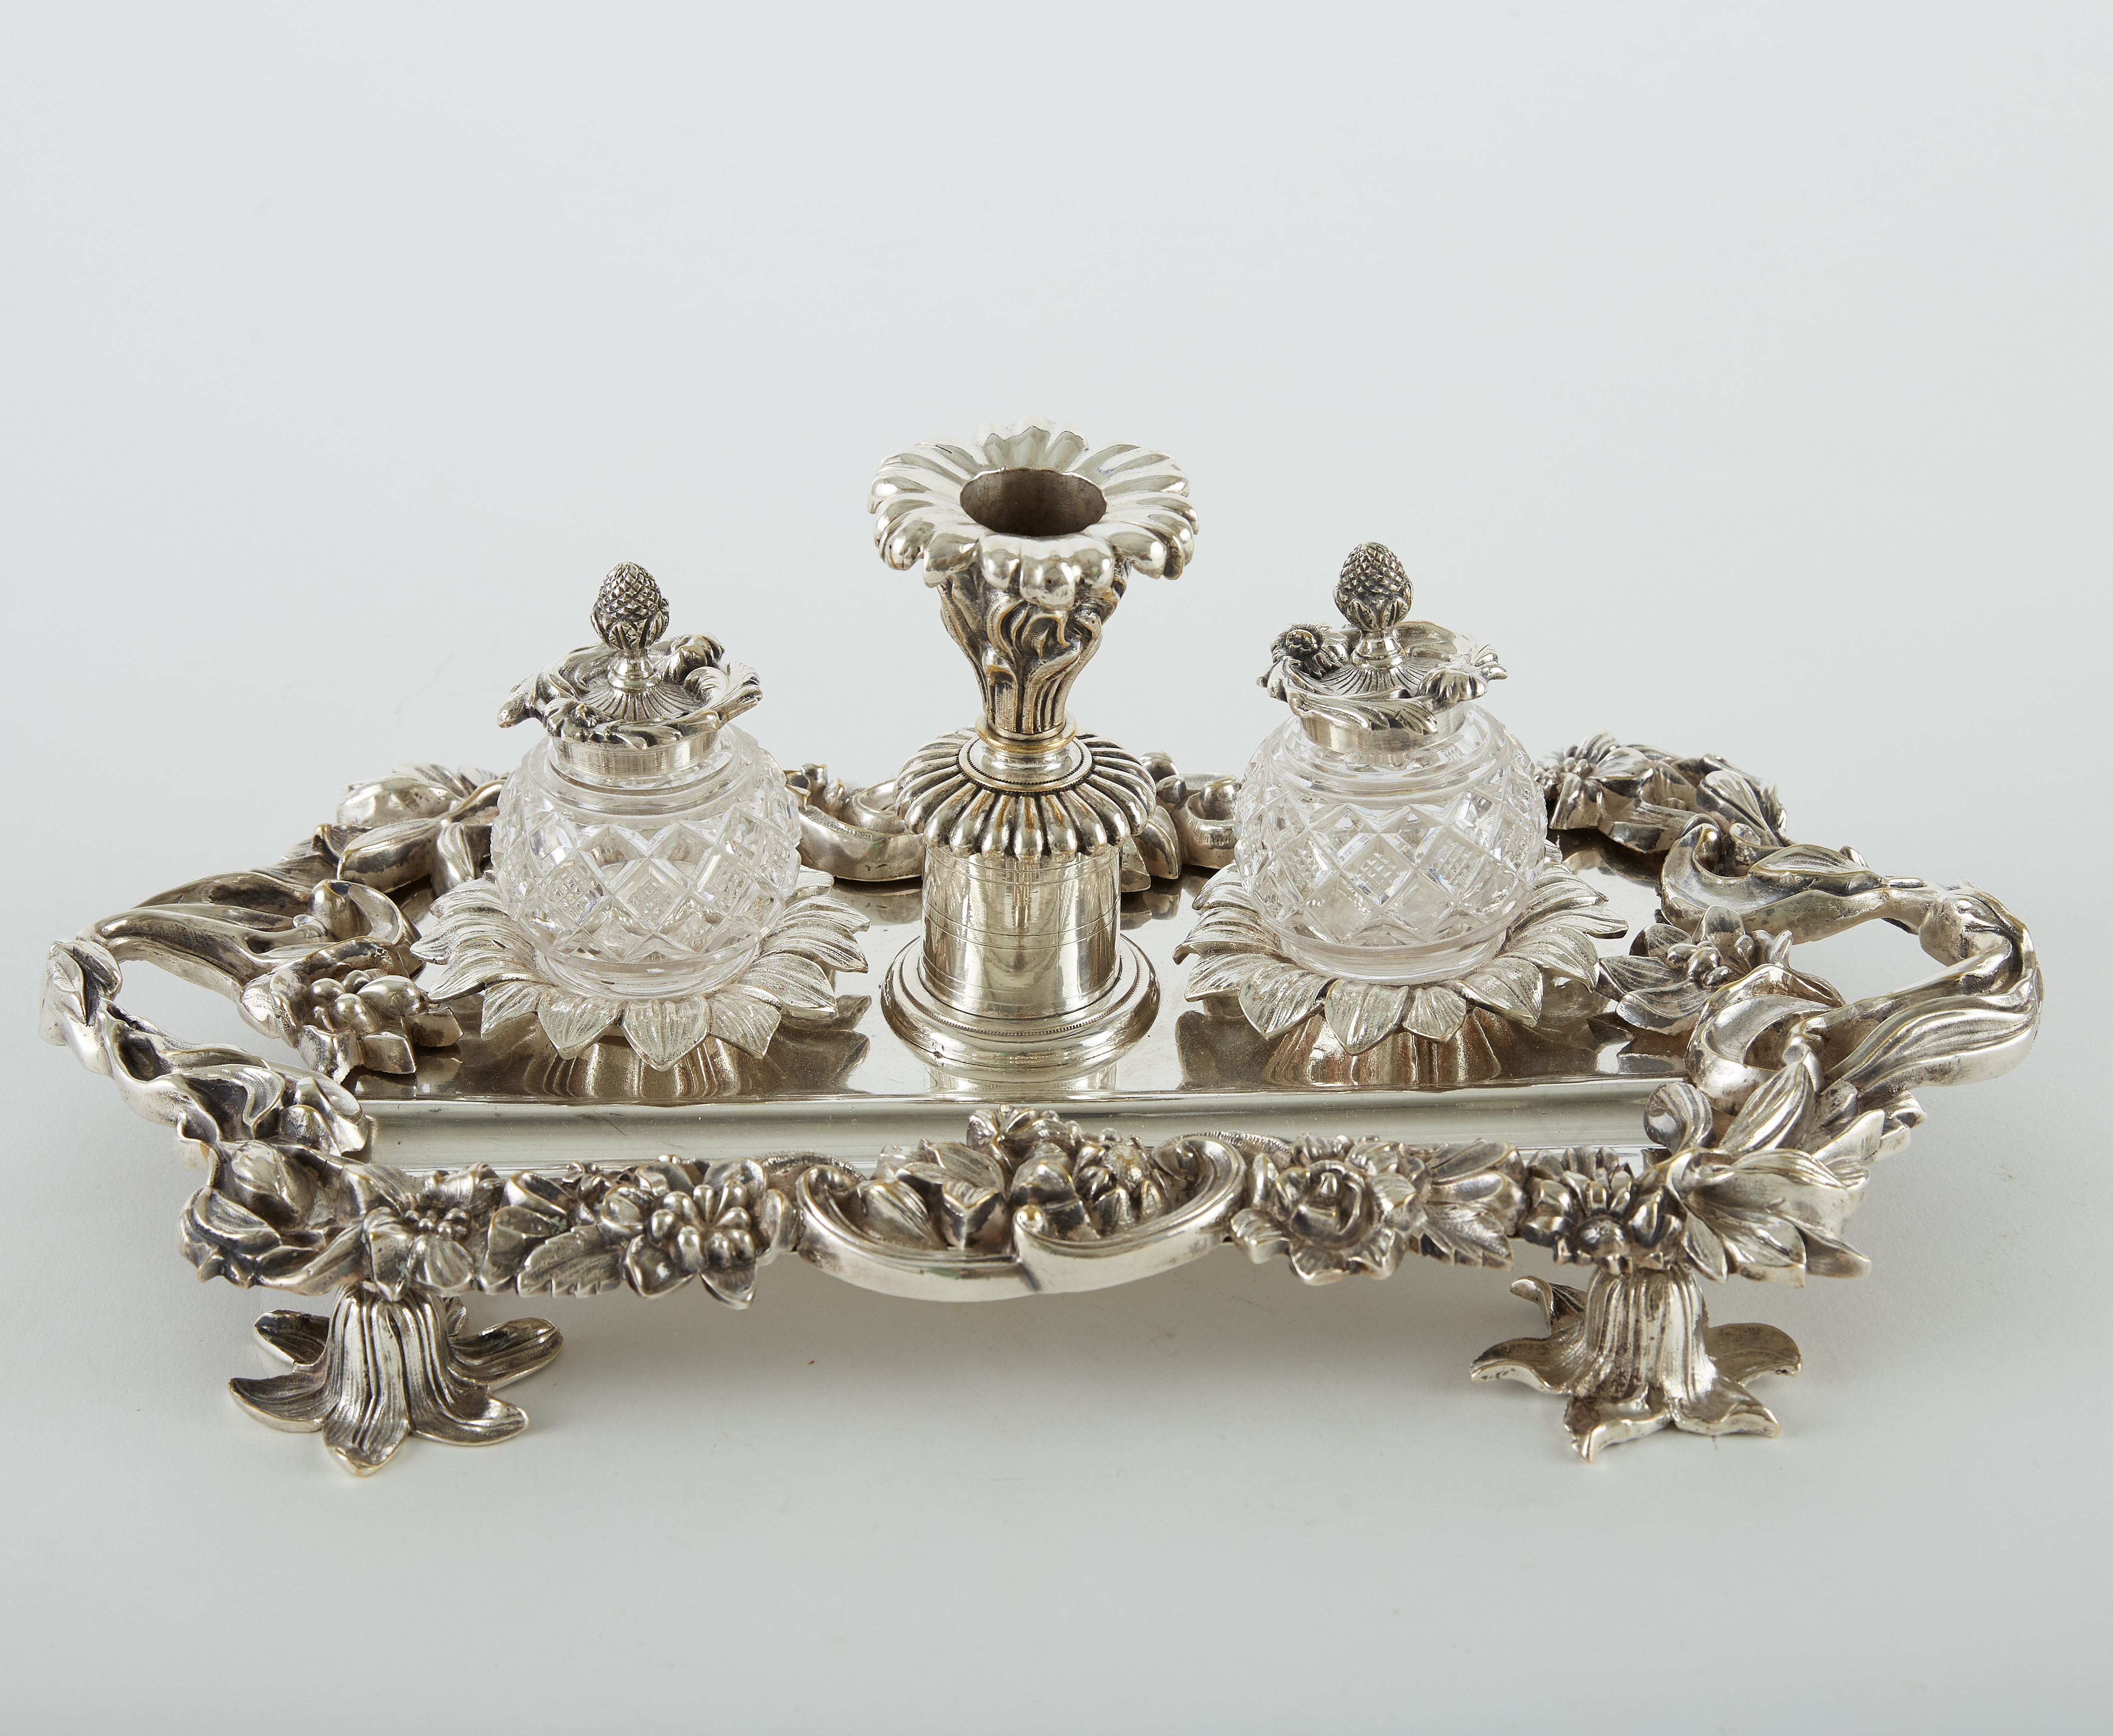 Lot 252: Ornate French Silver Plate and Cut Glass Inkstand/Inkwell